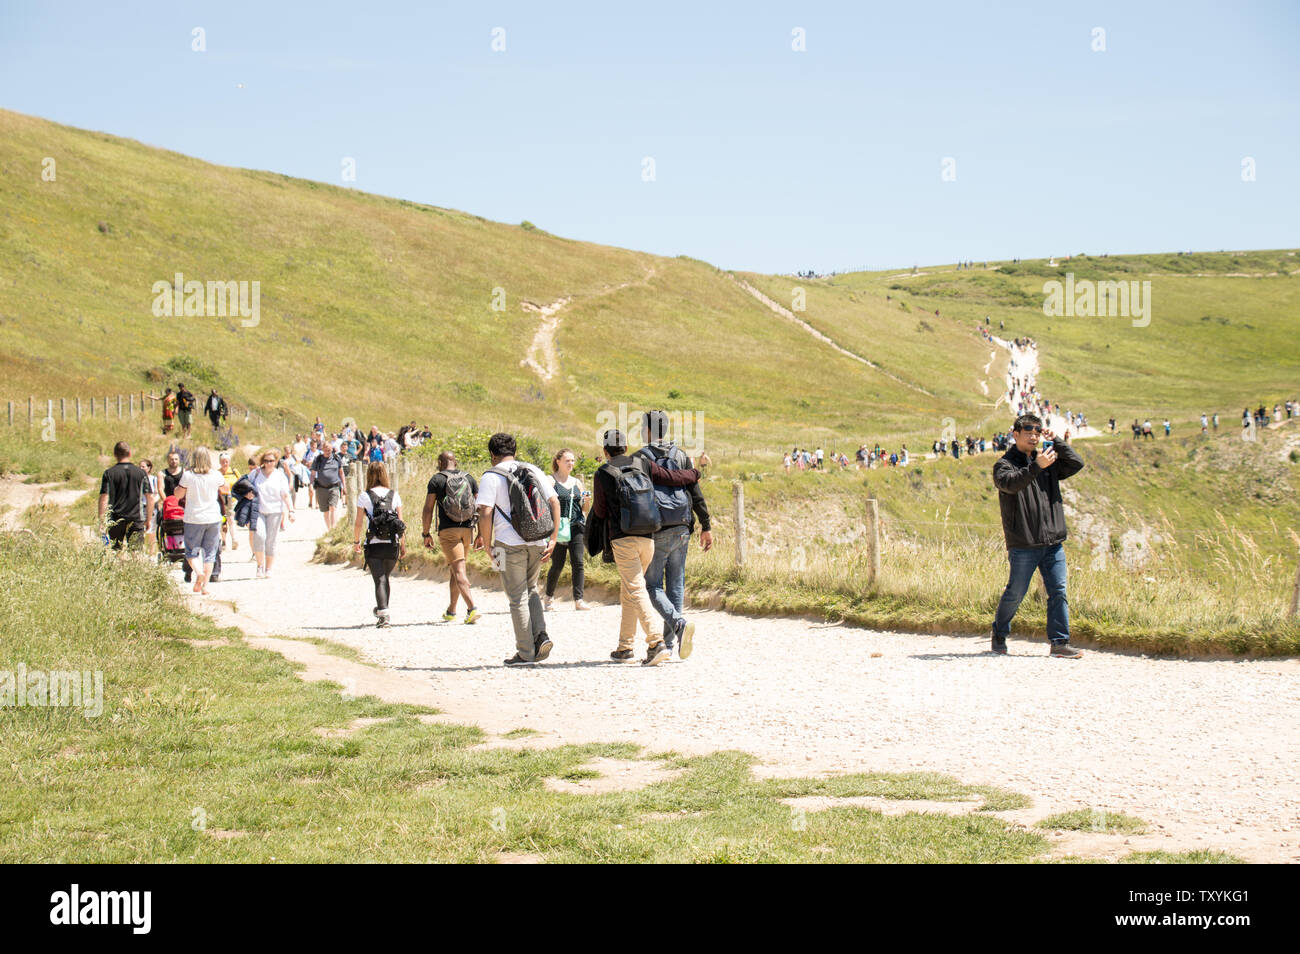 Durdle Door, England, UK - June 2019: People ascend up the Jurassic Coast after enjoying the beach at Durdle Door on hot summer day in June 2019 Stock Photo